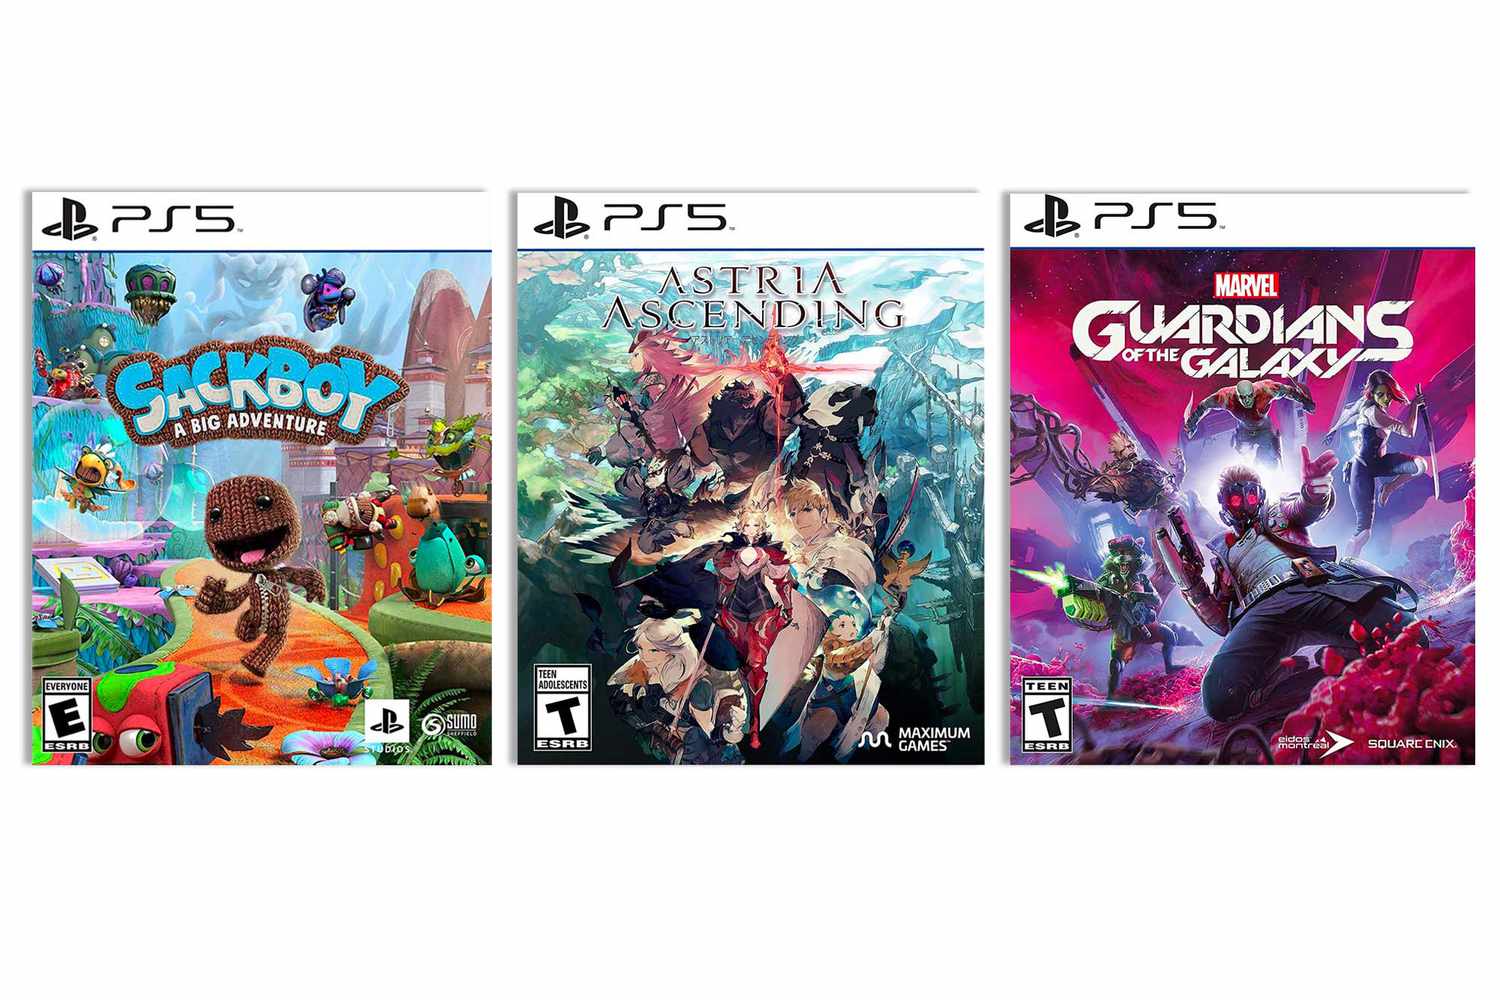 PS5 games on sale